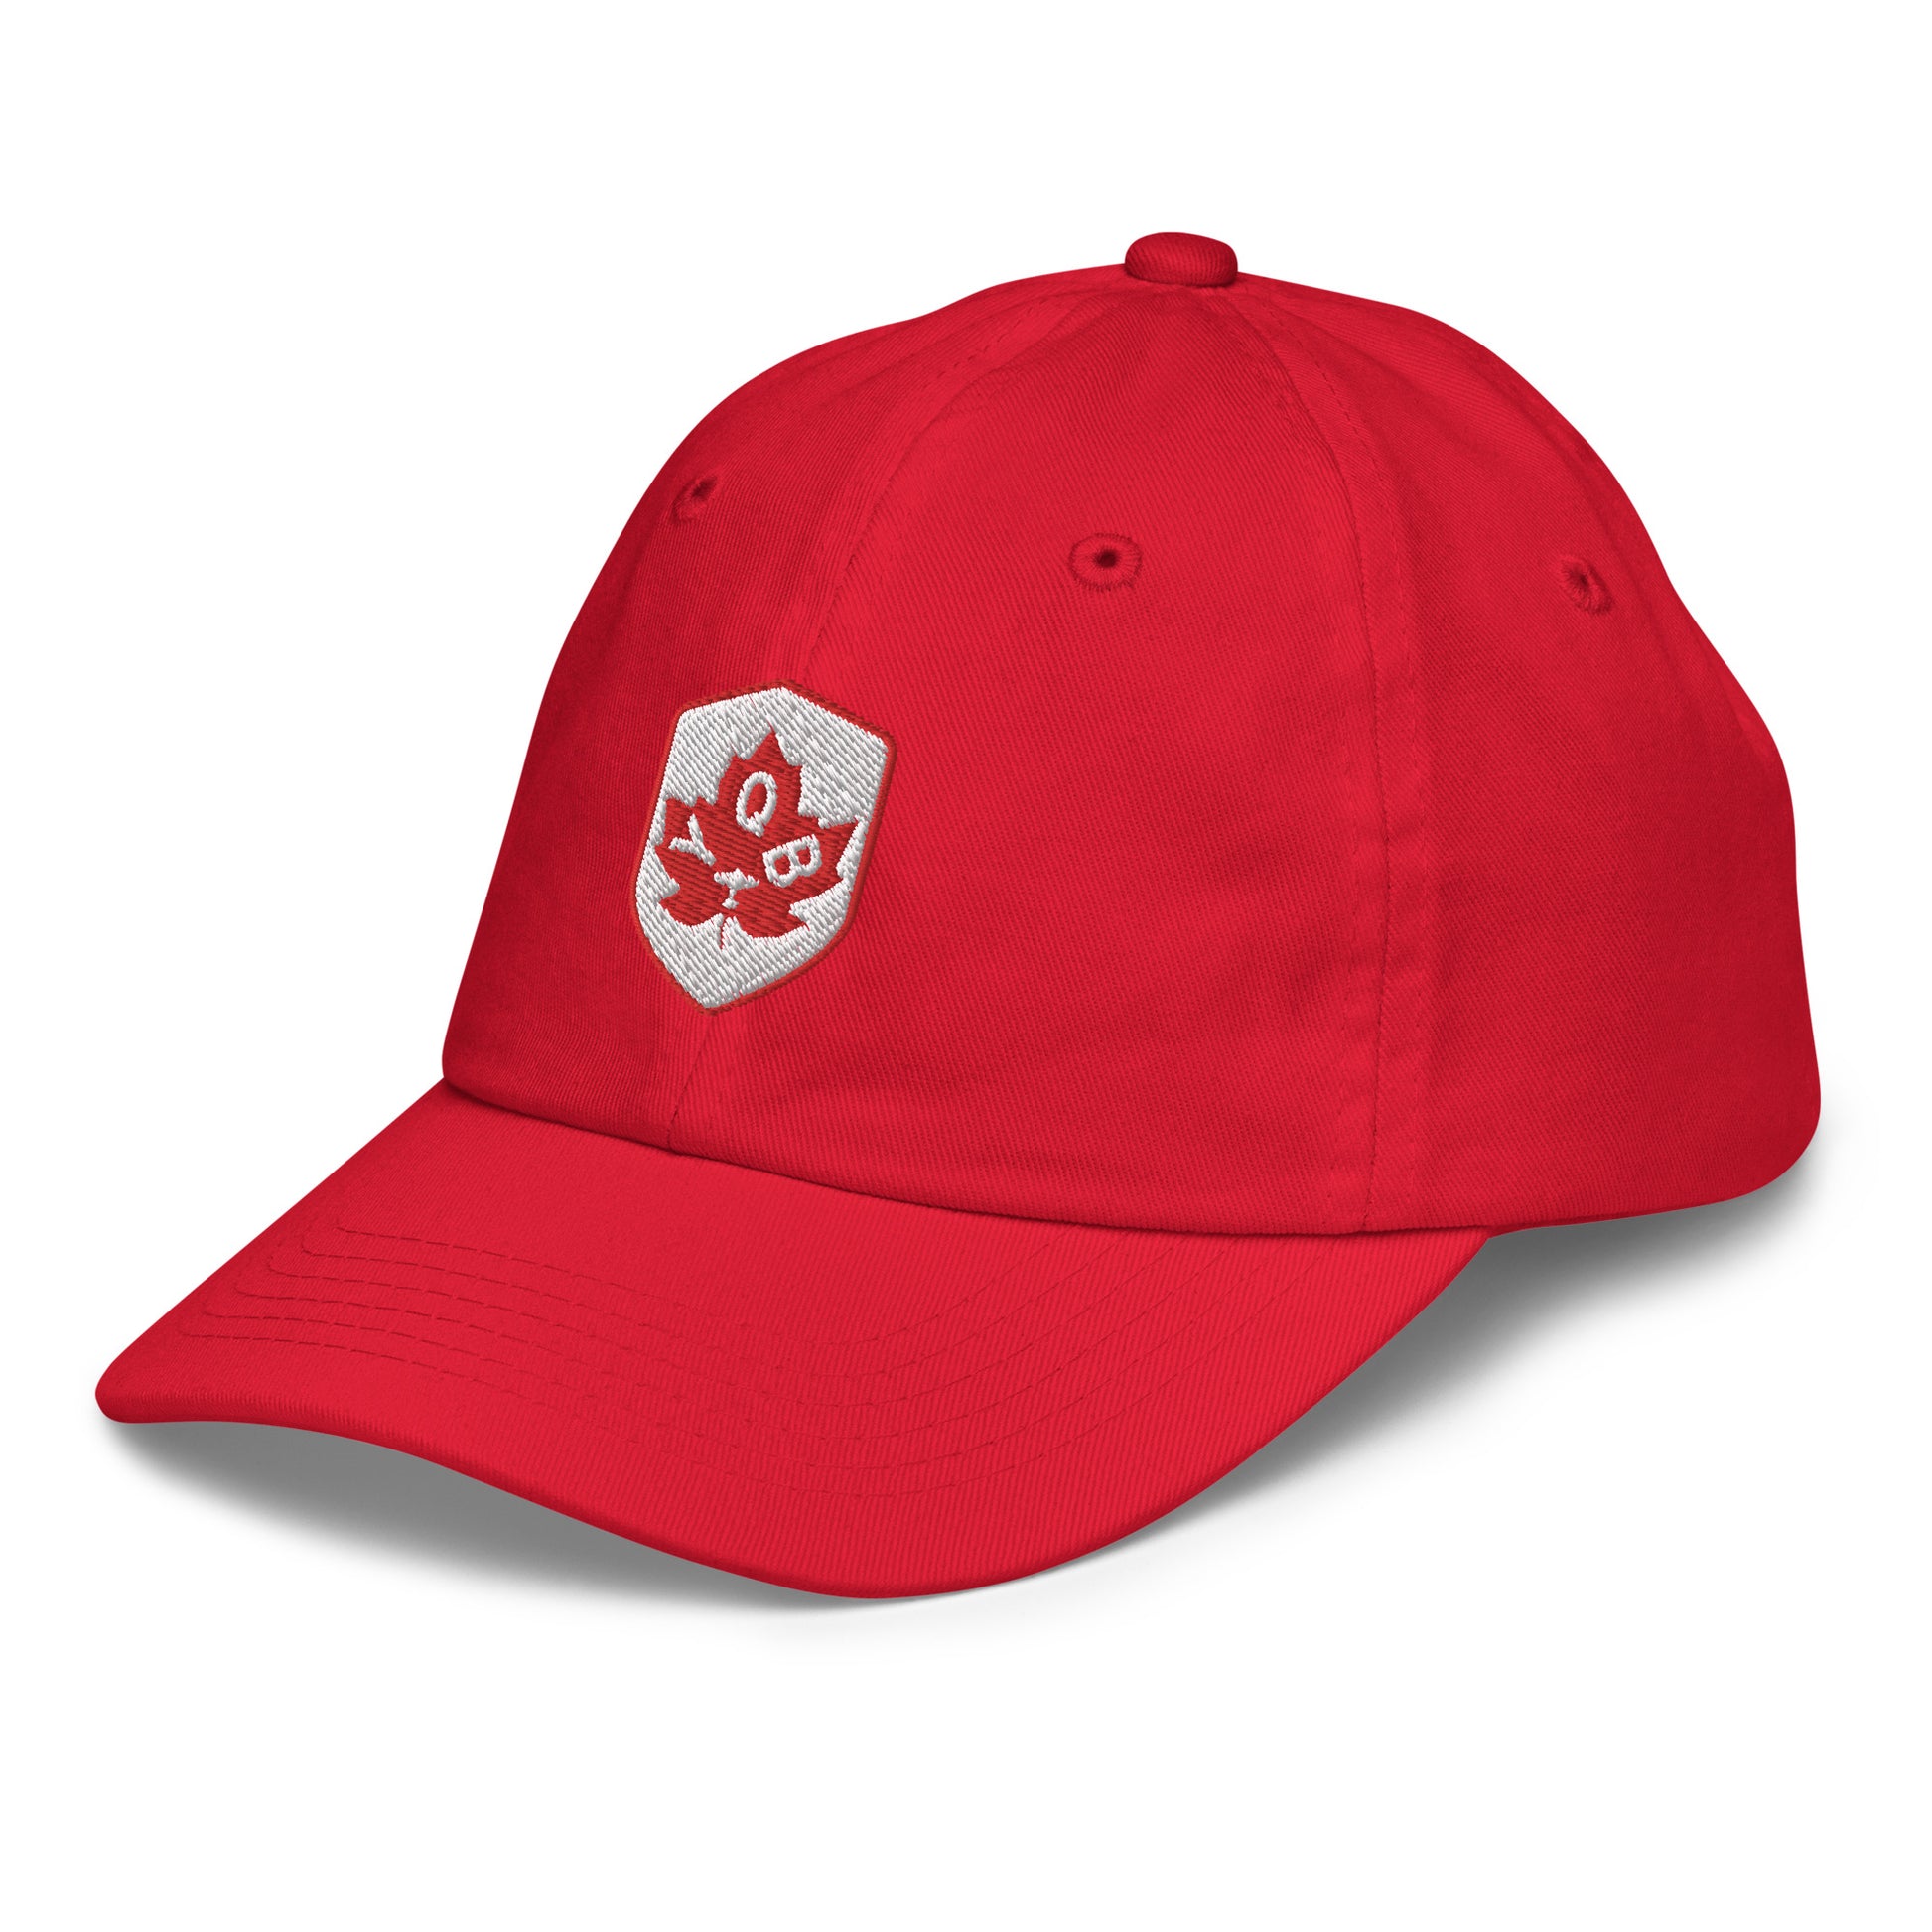 Maple Leaf Kid's Cap - Red/White • YQB Quebec City • YHM Designs - Image 17